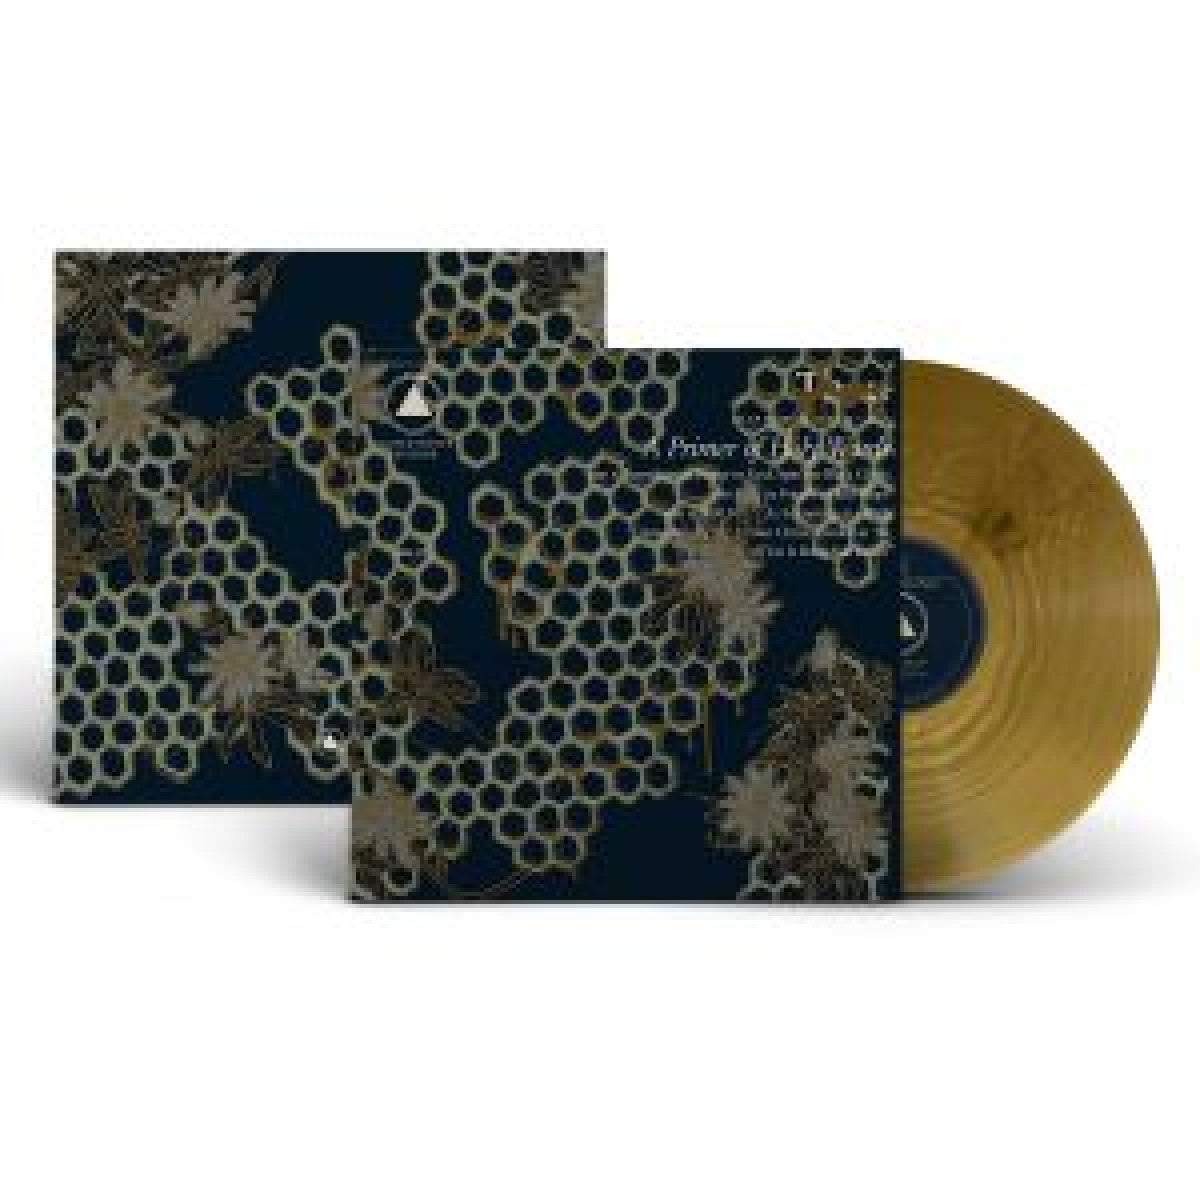 Thou - A Primer of Holy Words (Limited Edition on Transway Gold Vinyl)